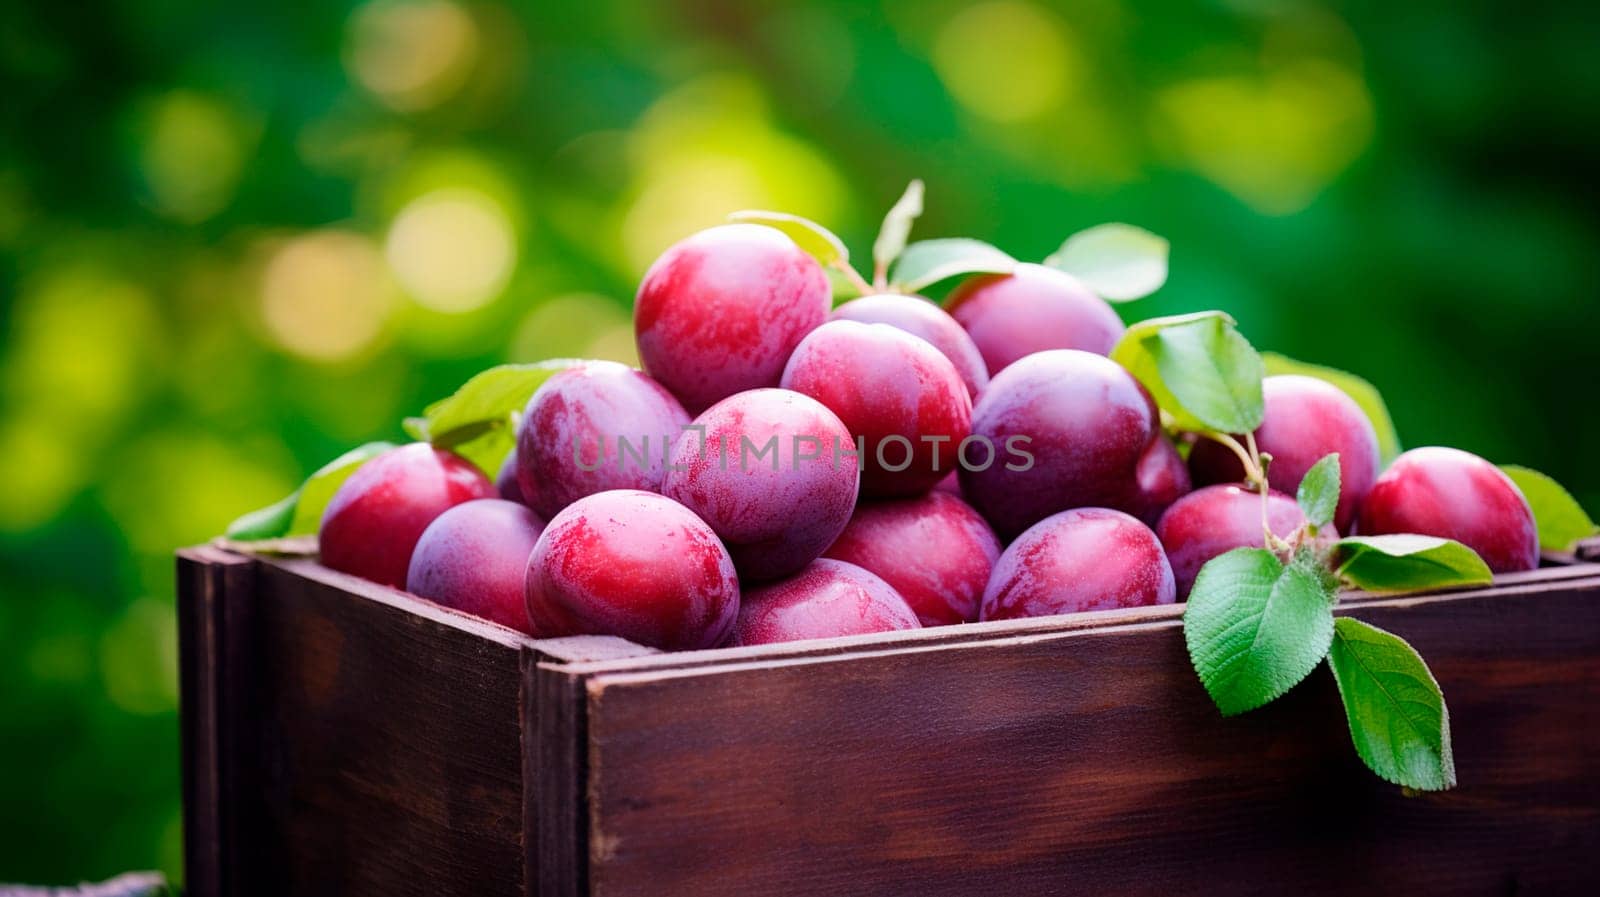 Plum harvest in a box in the garden. Selective focus. Food.